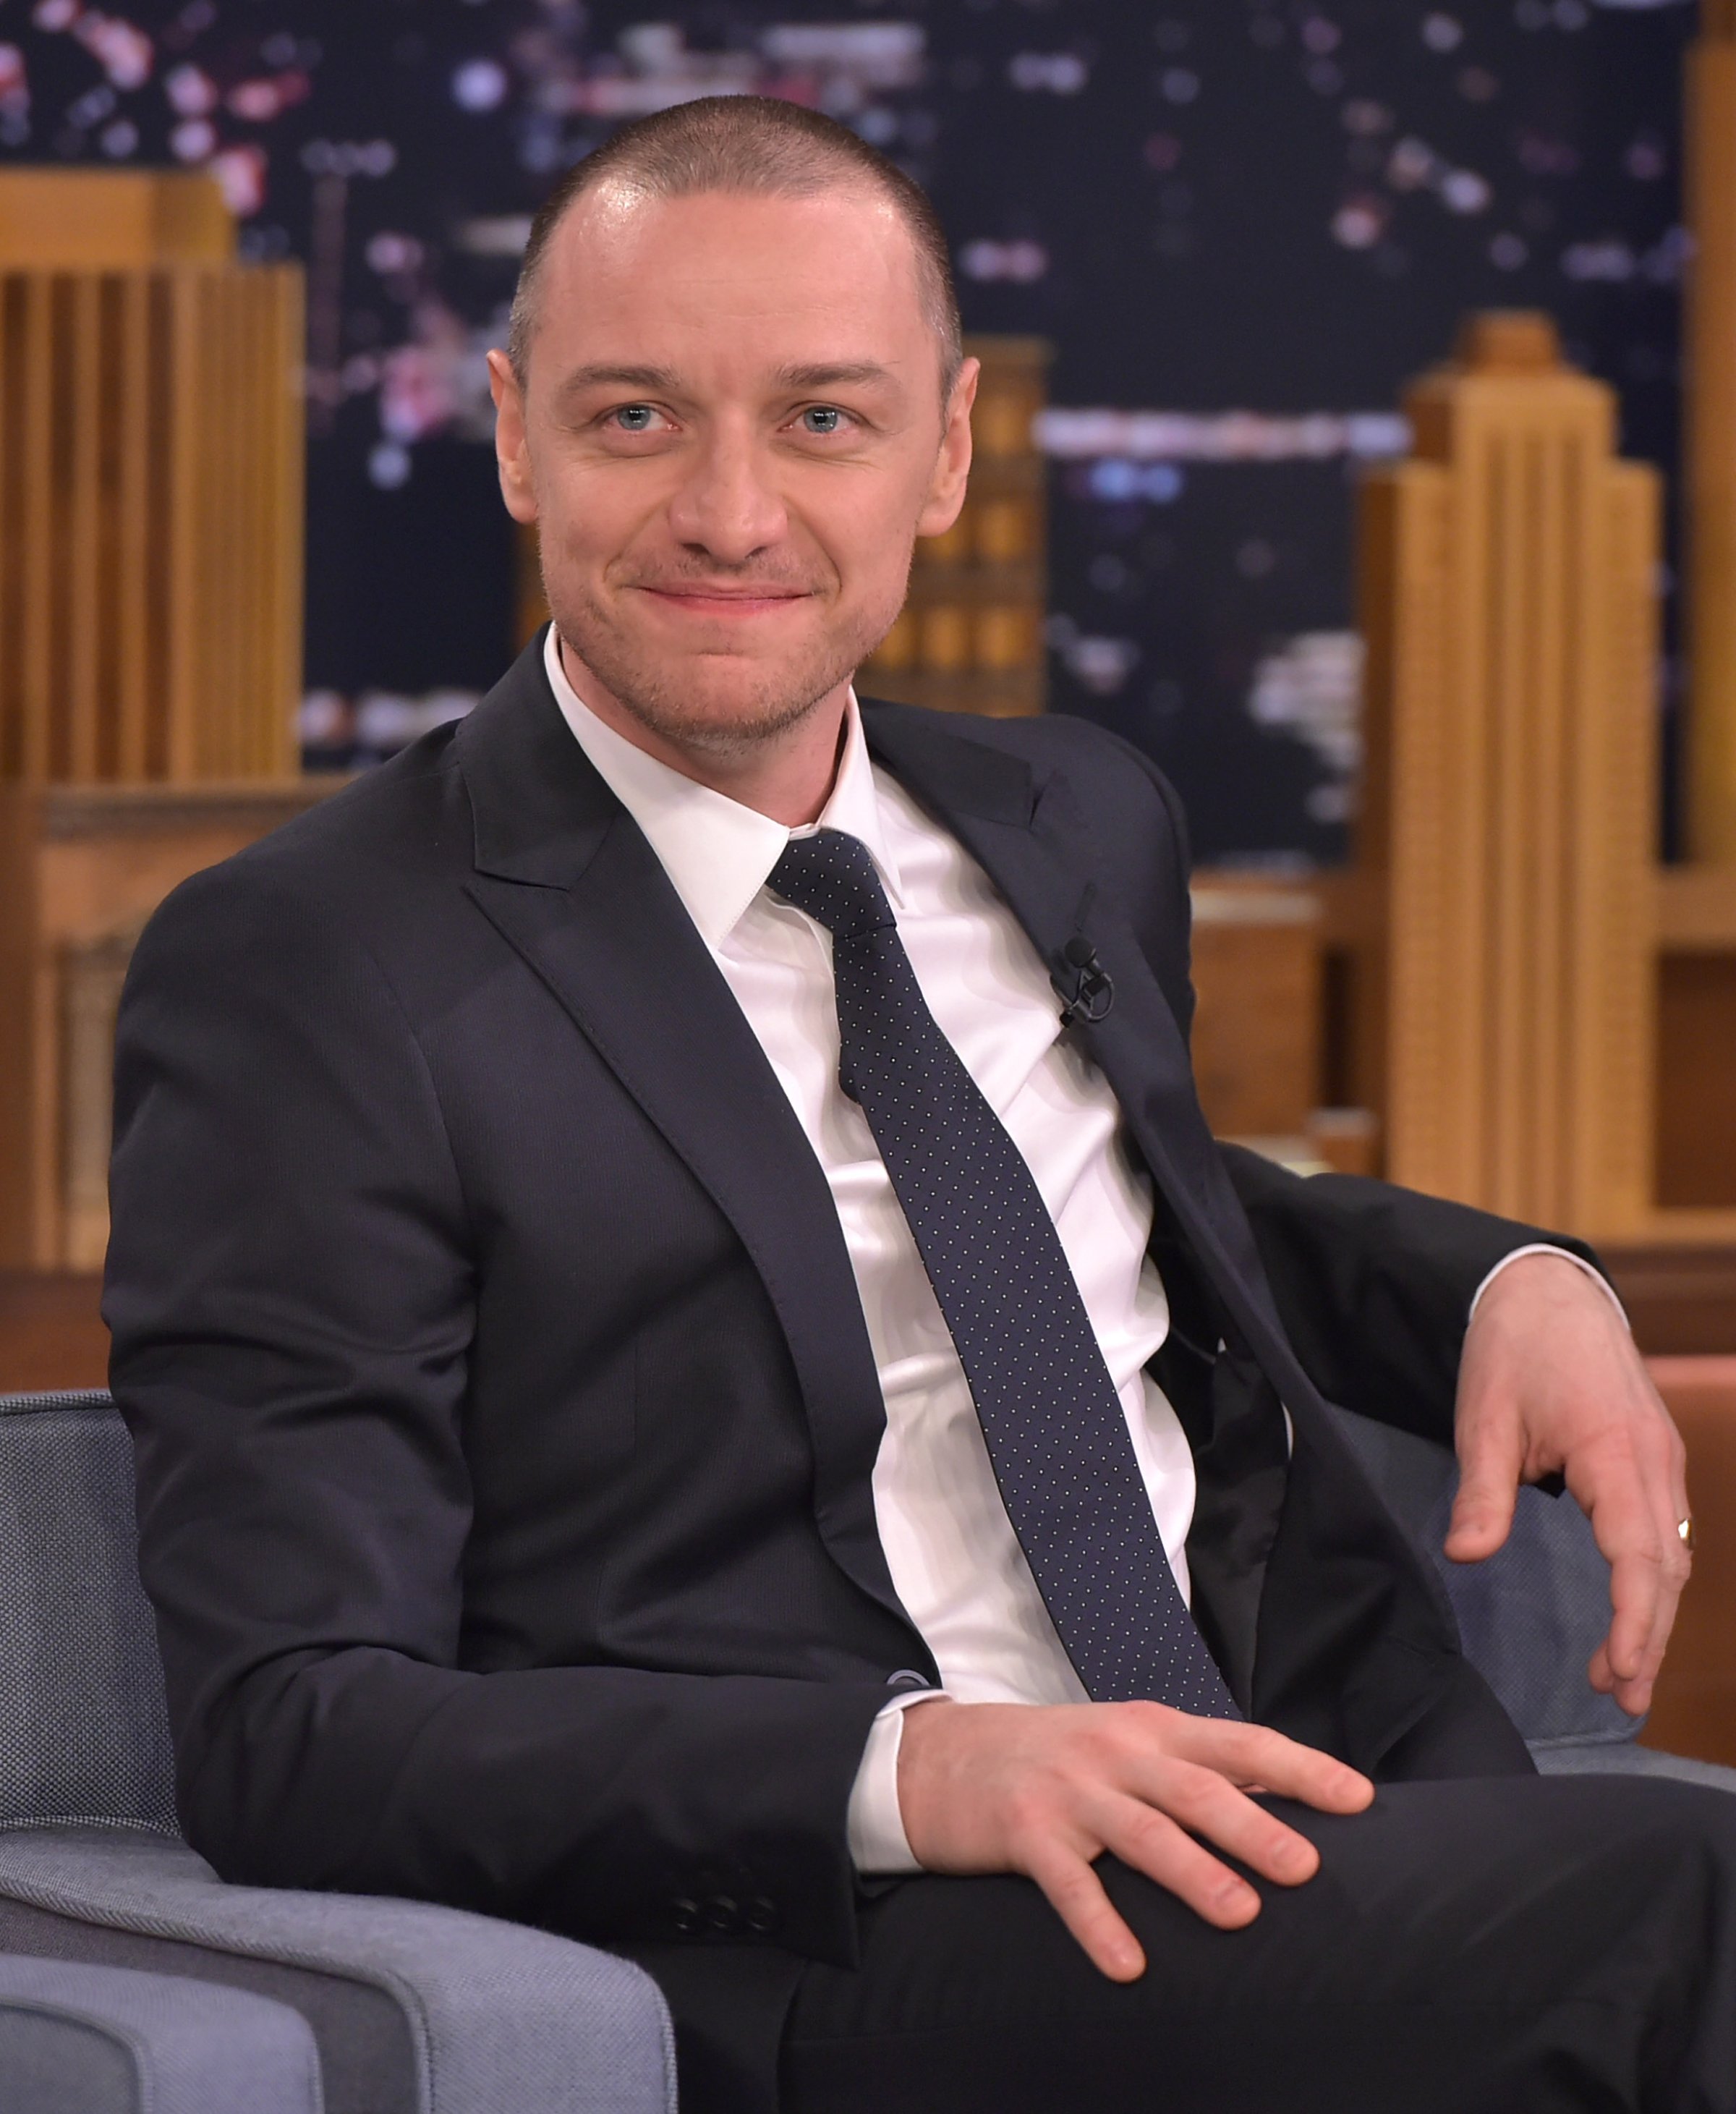 James McAvoy visits The Tonight Show Starring Jimmy Fallon at Rockefeller Center on Nov. 11, 2015 in New York City.